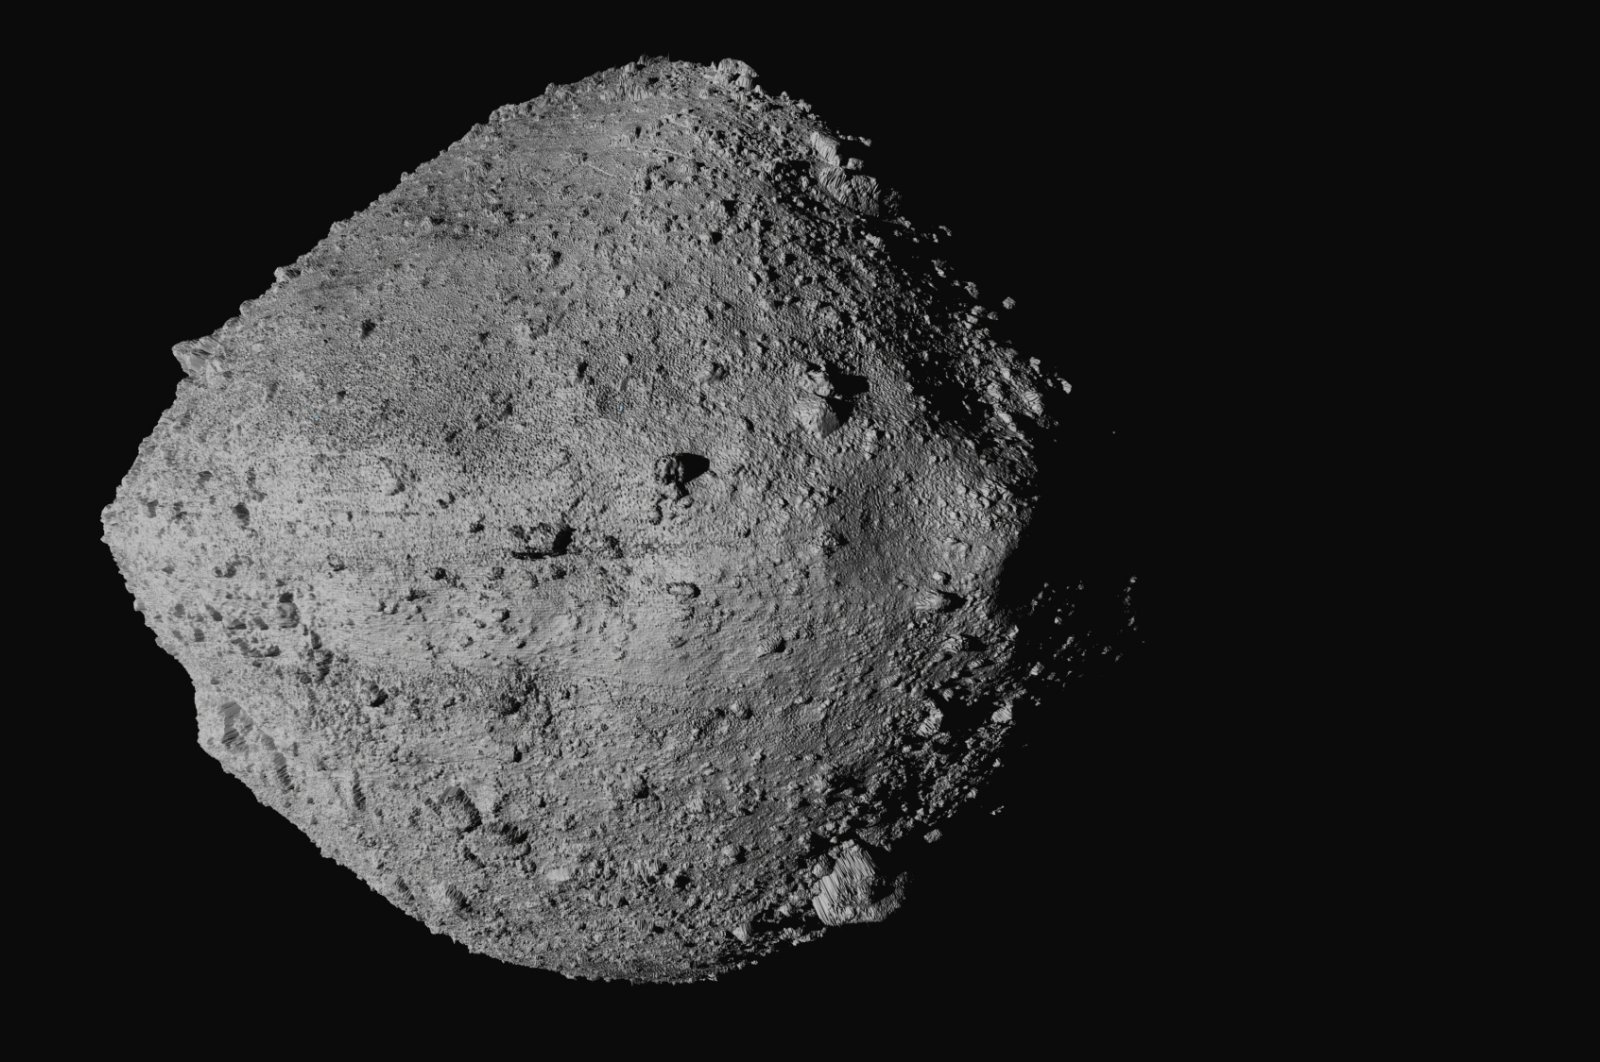 This undated image made available by NASA shows the asteroid Bennu from the OSIRIS-REx spacecraft. (NASA via AP)